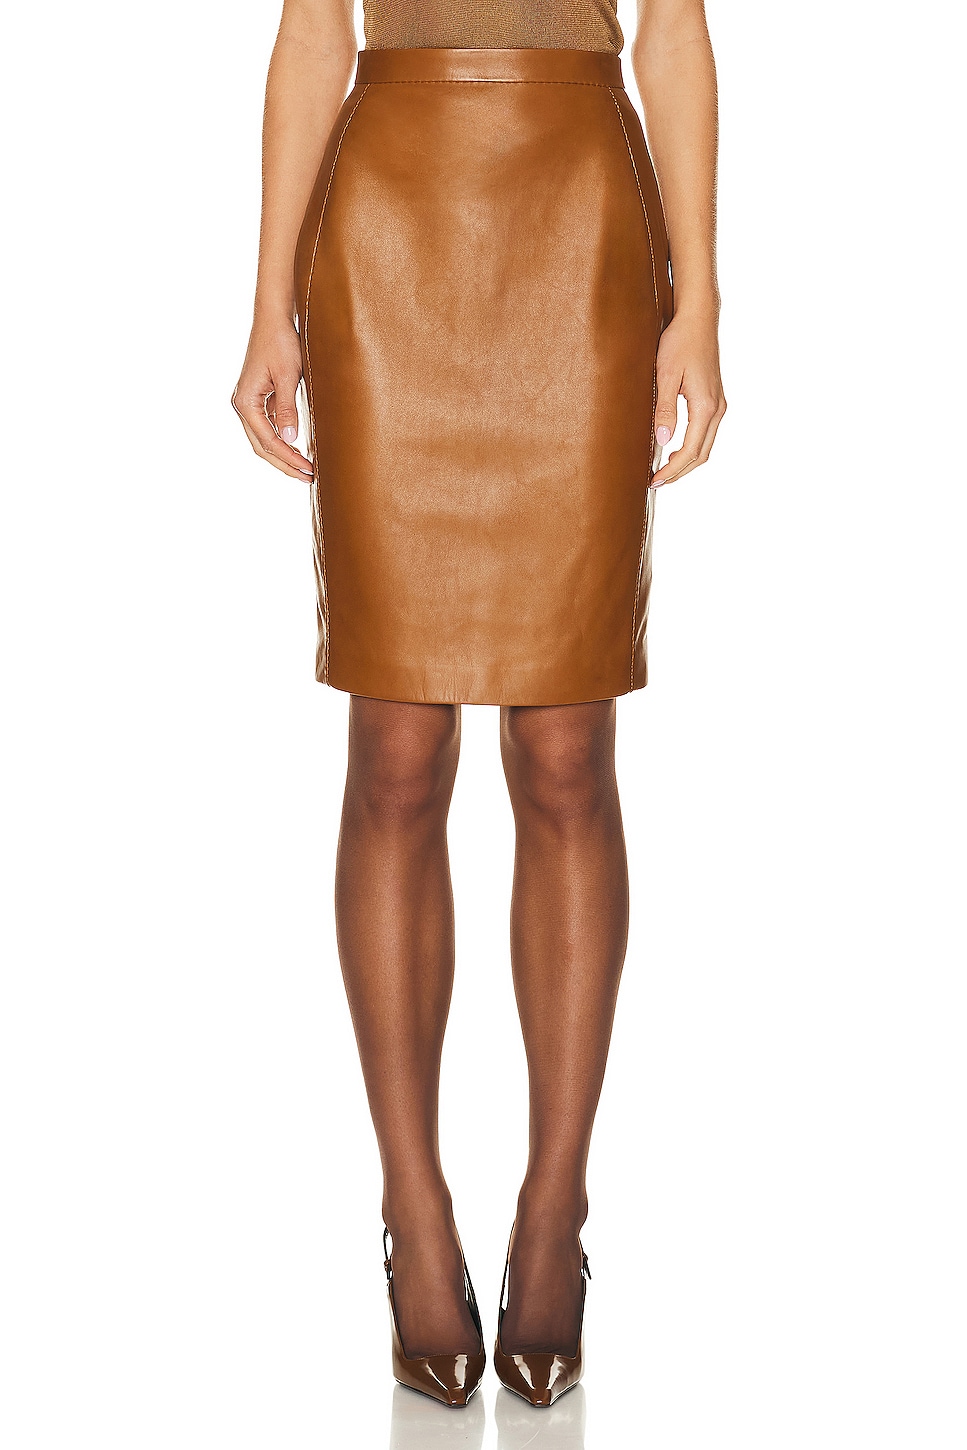 Image 1 of Saint Laurent Leather Skirt in Marron Glace